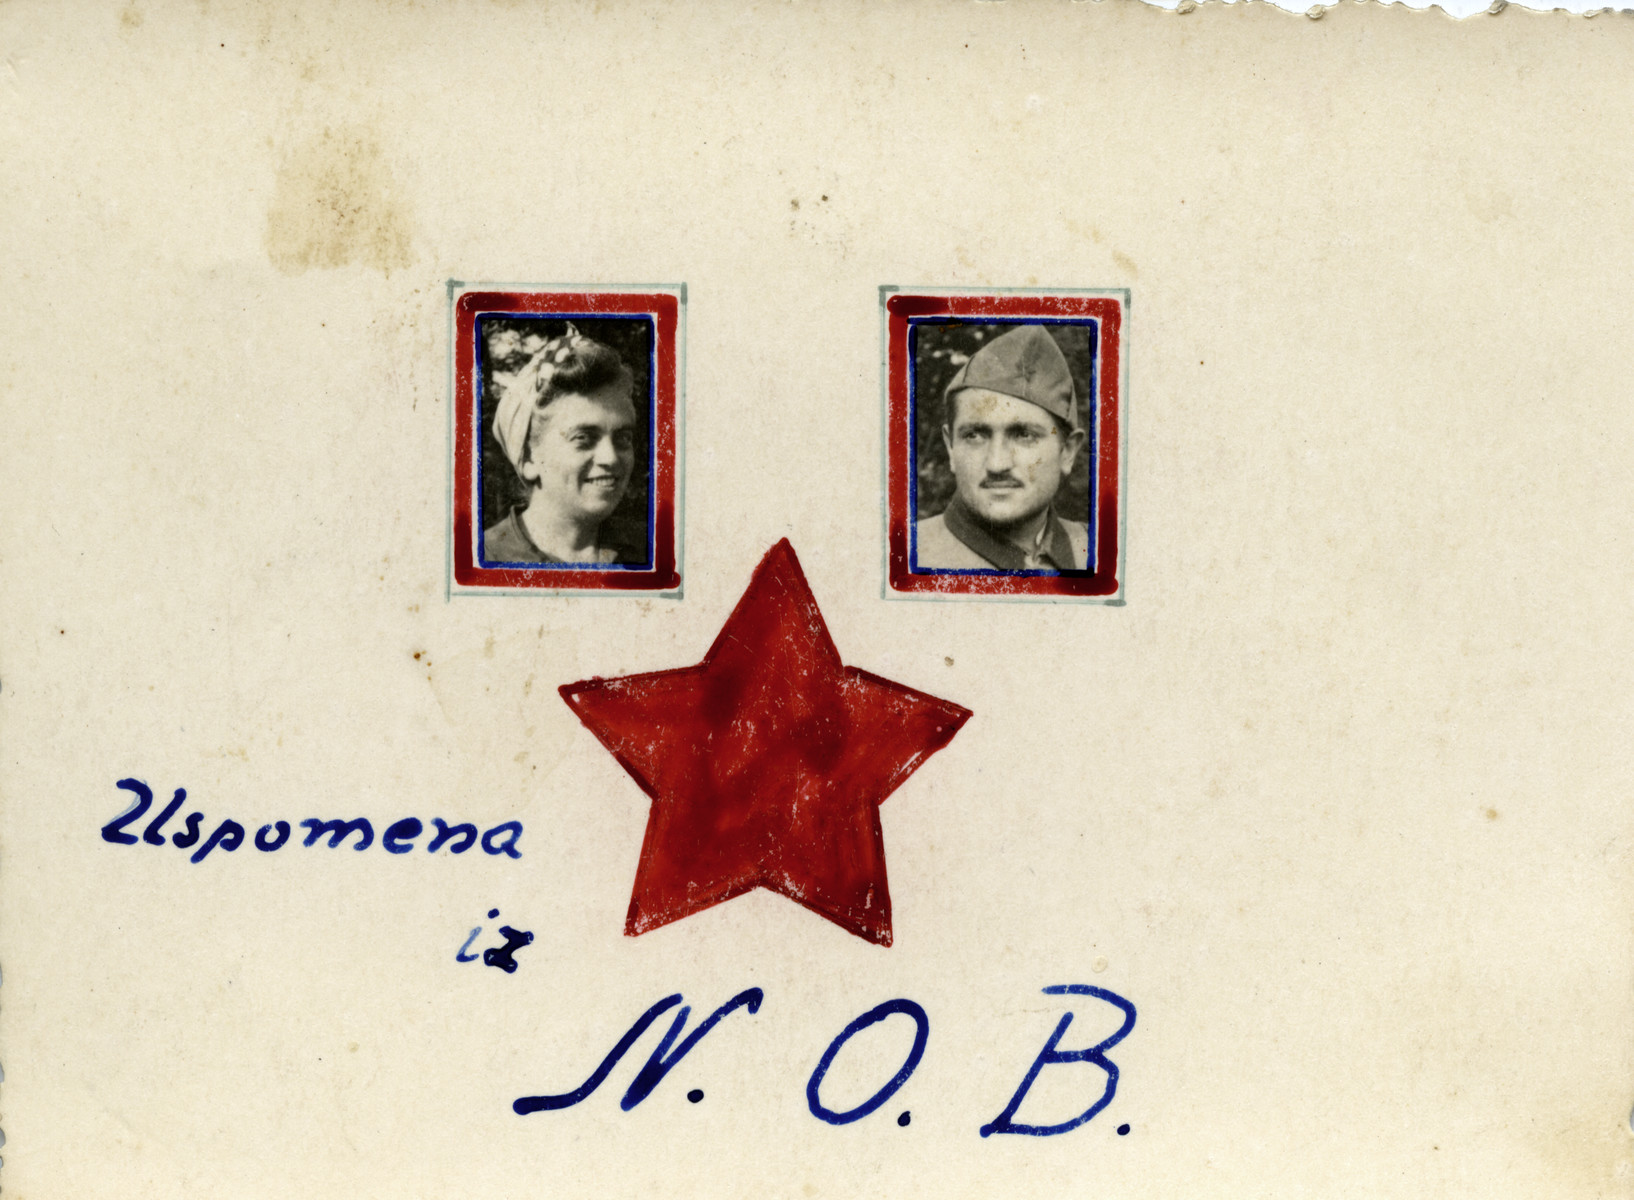 Card with a drawing of a red star, photographs and the initials NOB (the Yugoslav Partisan movement).

The text reads "a souvenir from the NOB."